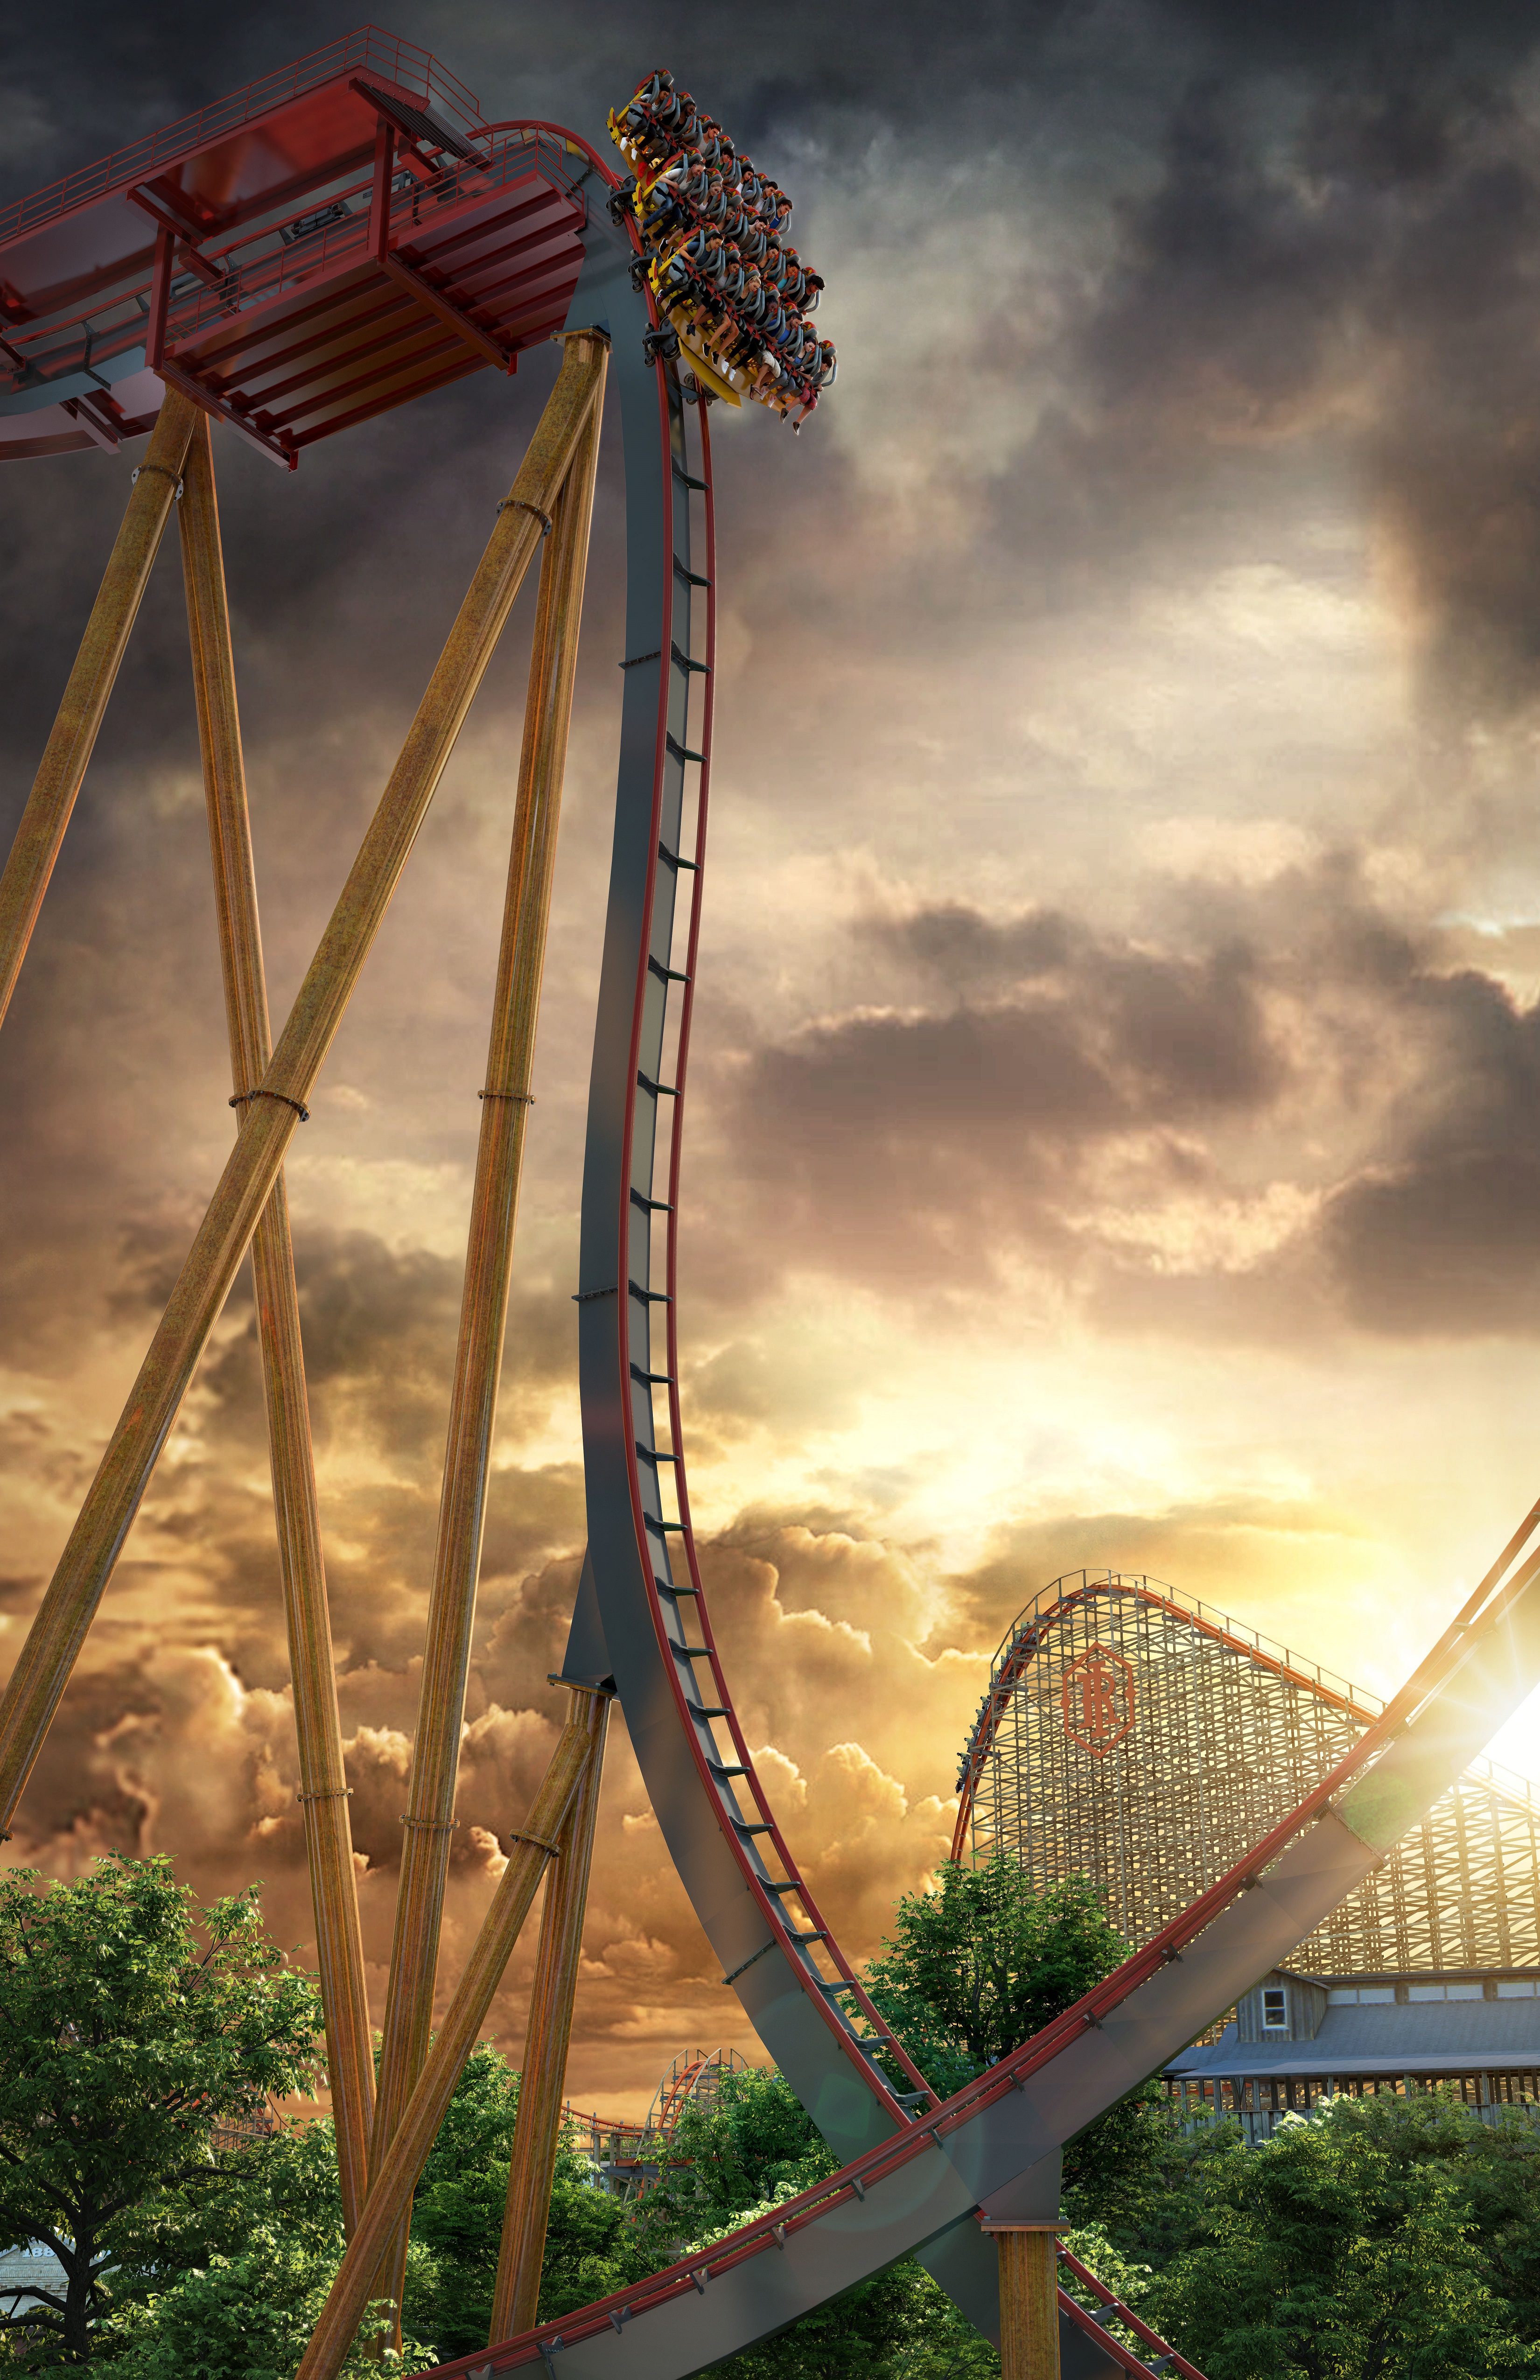 Worlds Steepest Dive Coaster coming to Six Flags Fiesta Texas in 2022